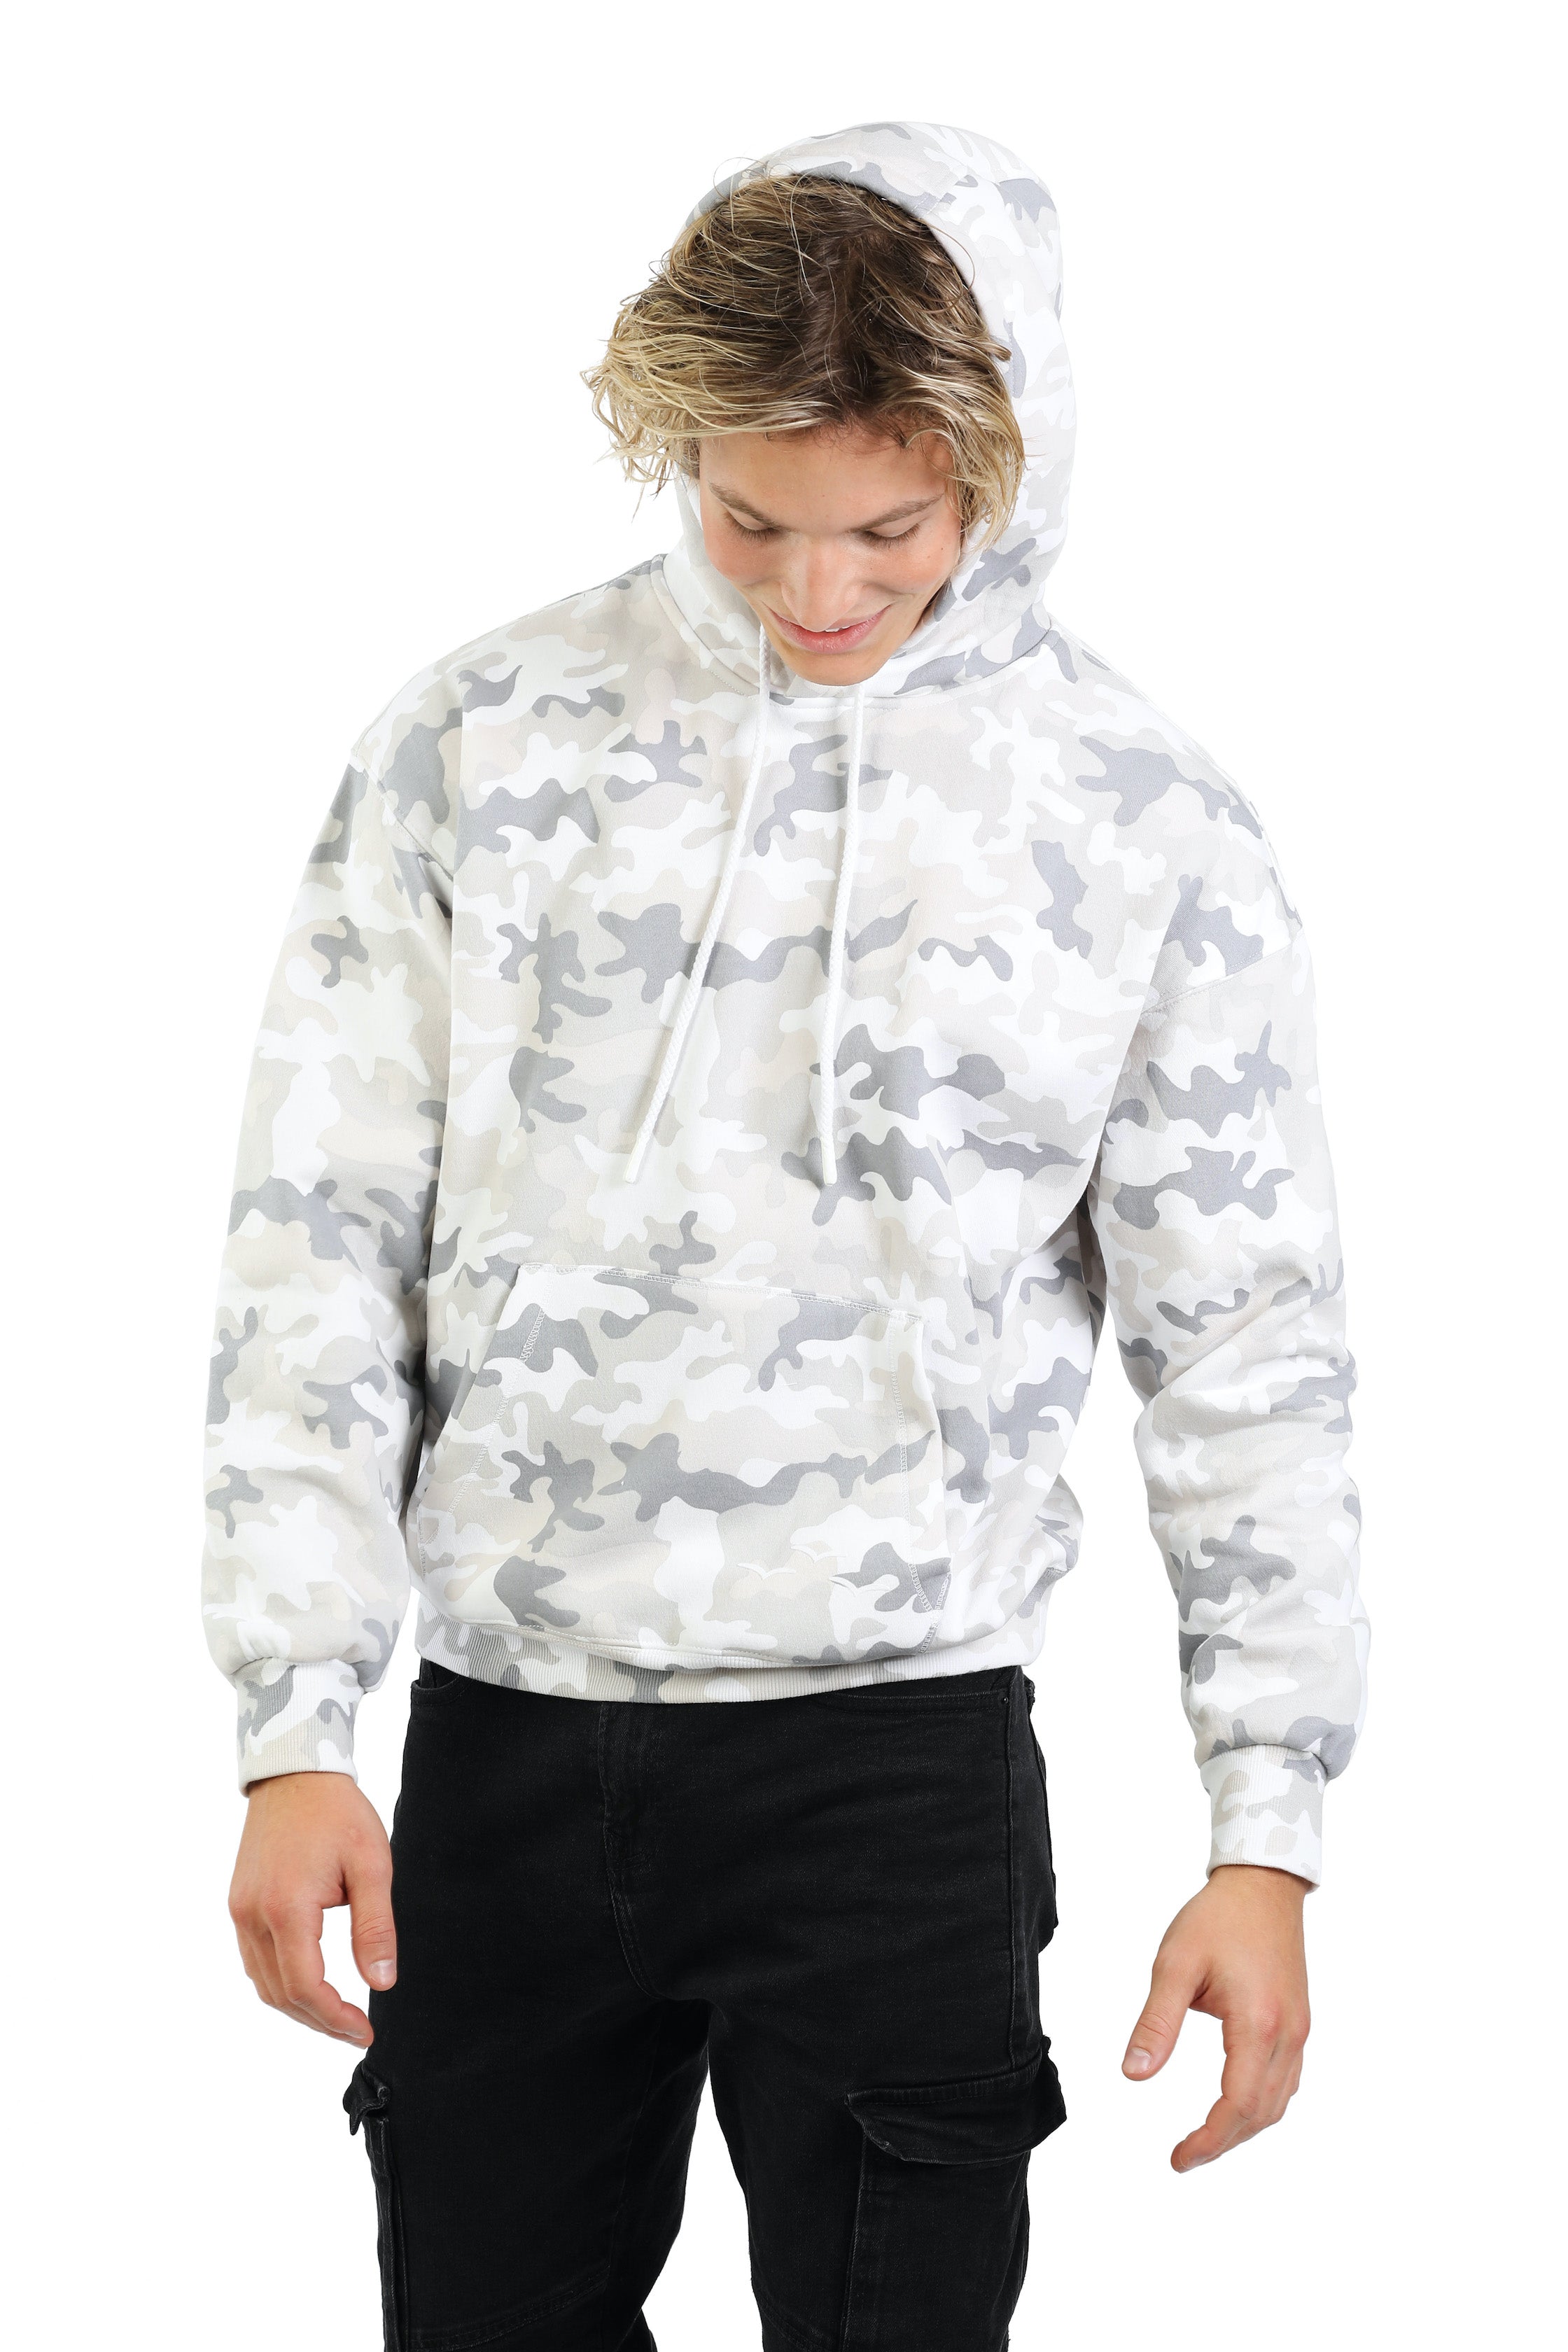 Men's hoodie in white camo from Lazypants - always a great buy at a reasonable price.